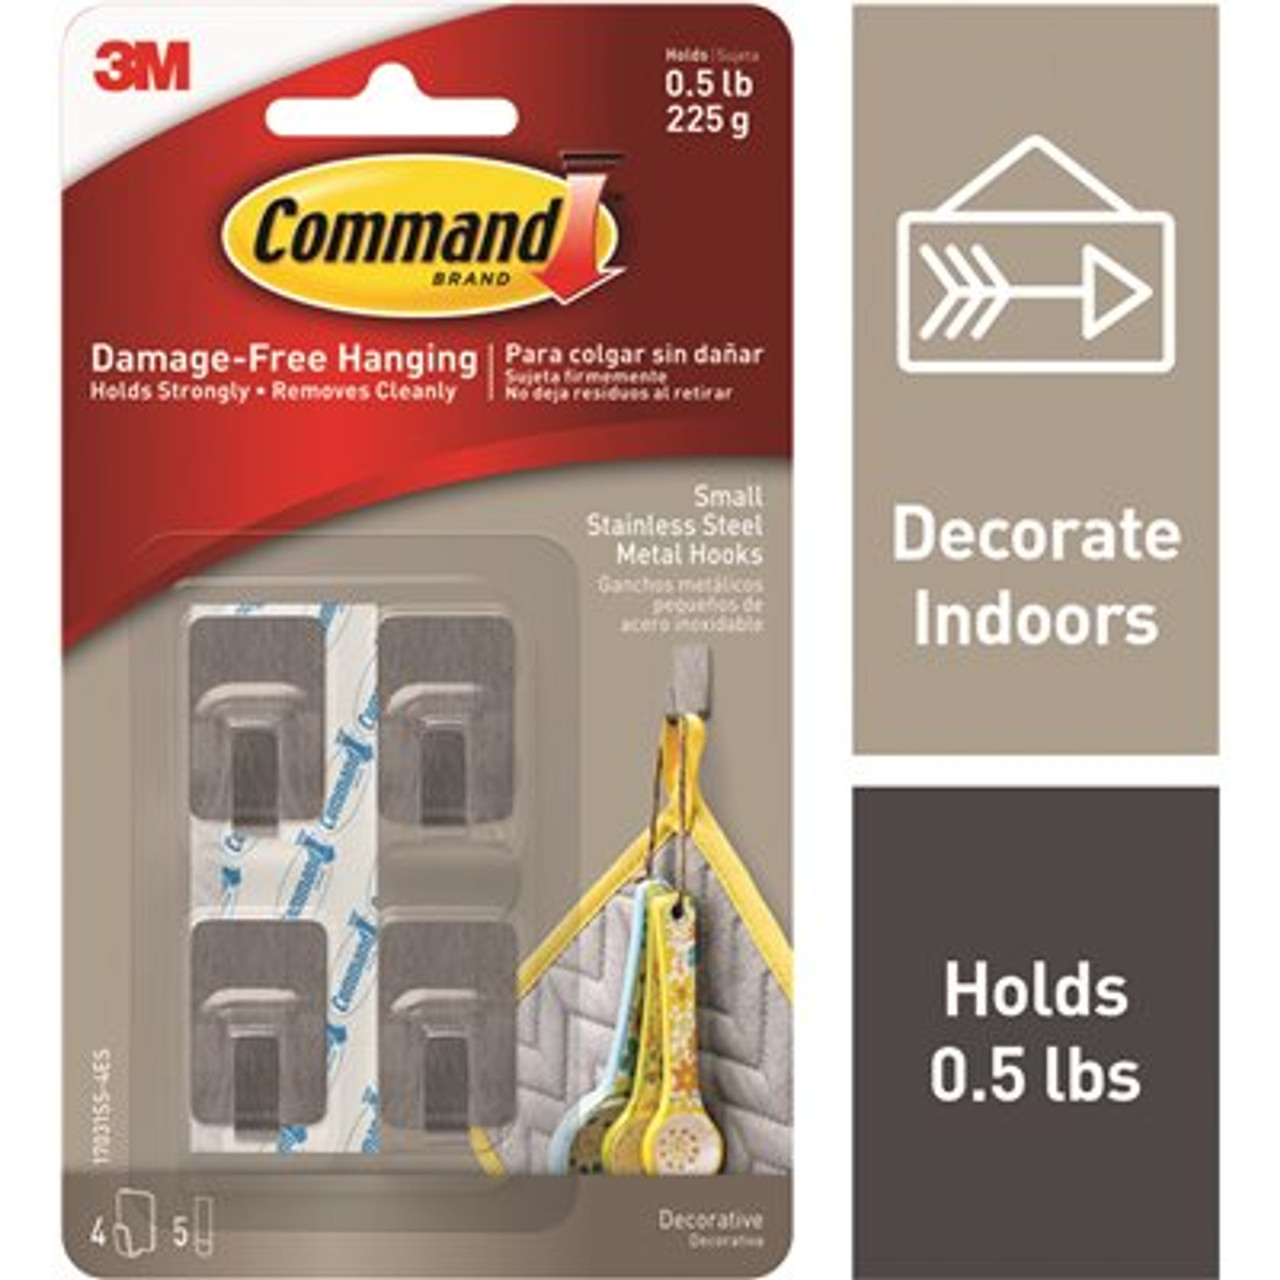 Command 1/2 Lbs. Small Stainless Steel Metal Hooks (Case Of 24-Packs, 4-Hooks, 5 Adhesive Strips)